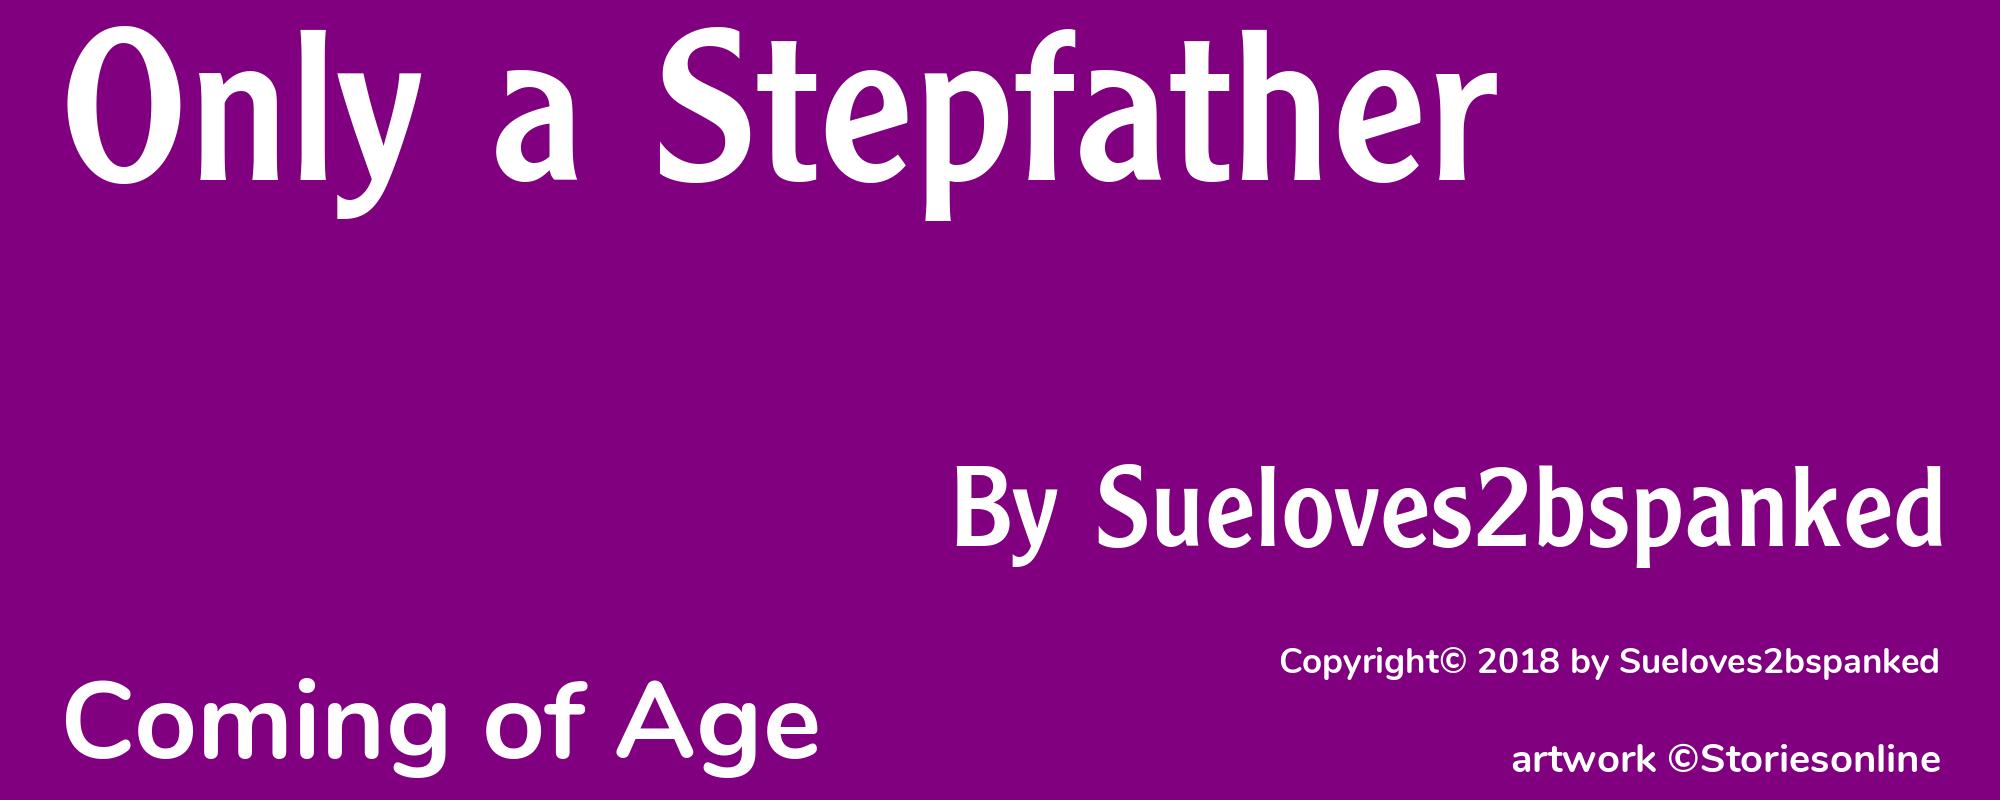 Only a Stepfather - Cover